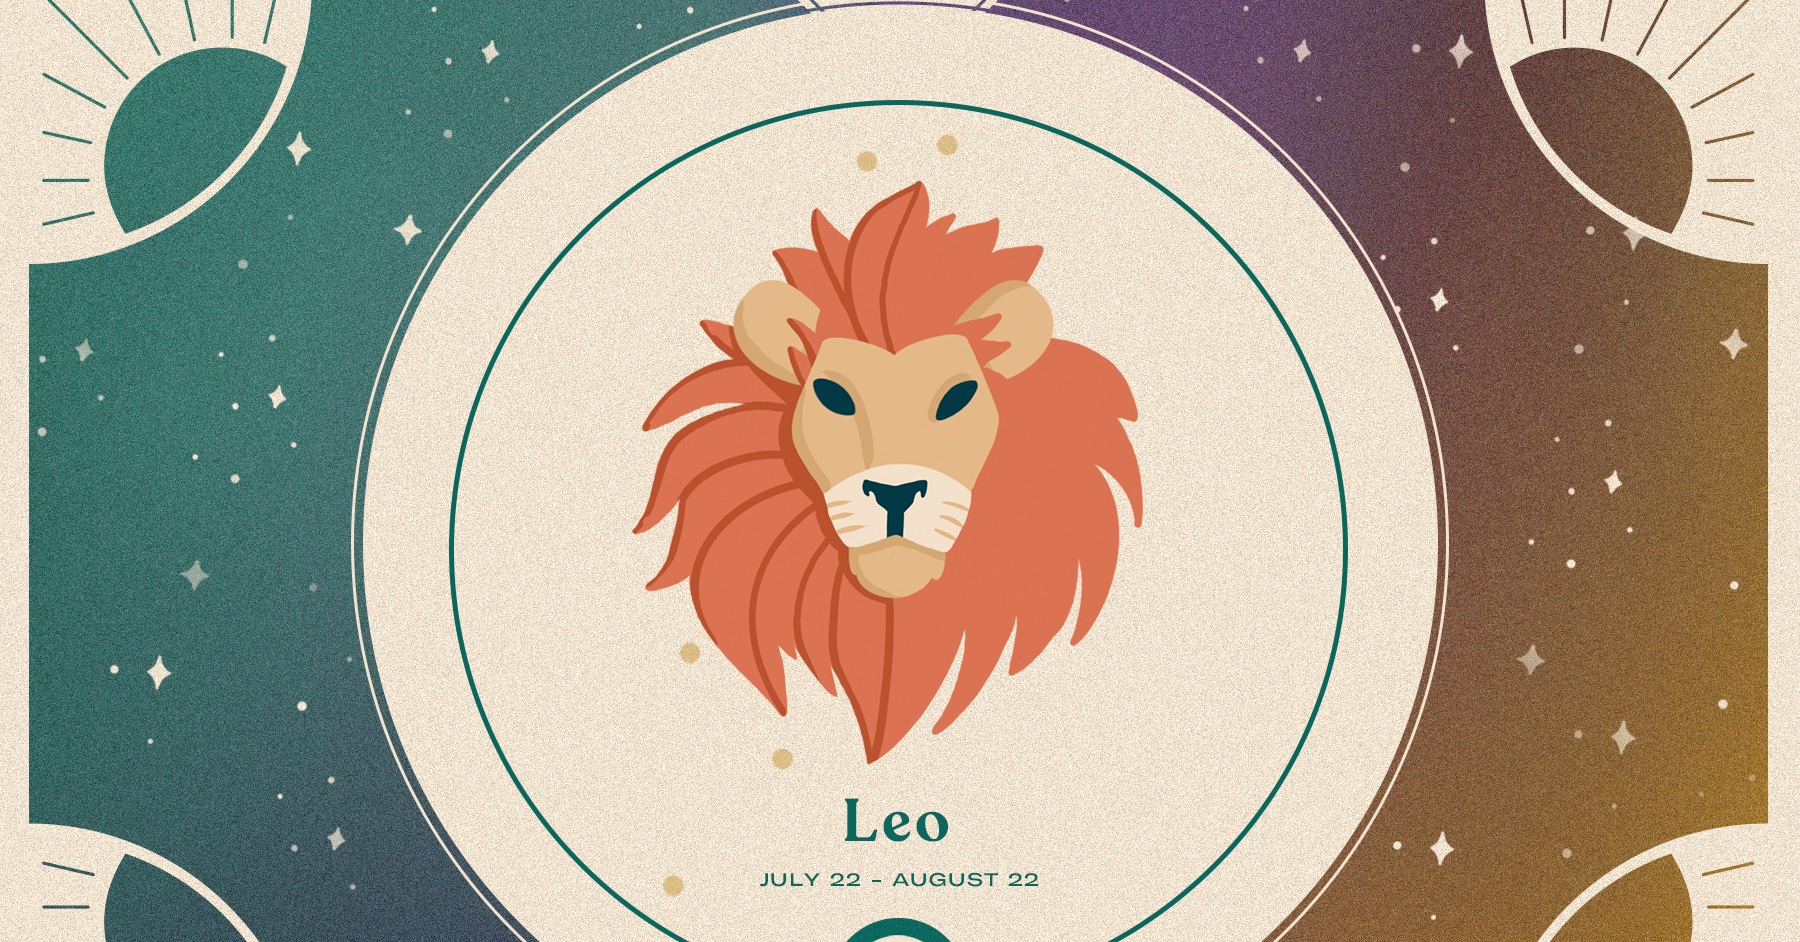 Leo Zodiac Sign Meaning - Leo Astrology | HelloGiggles